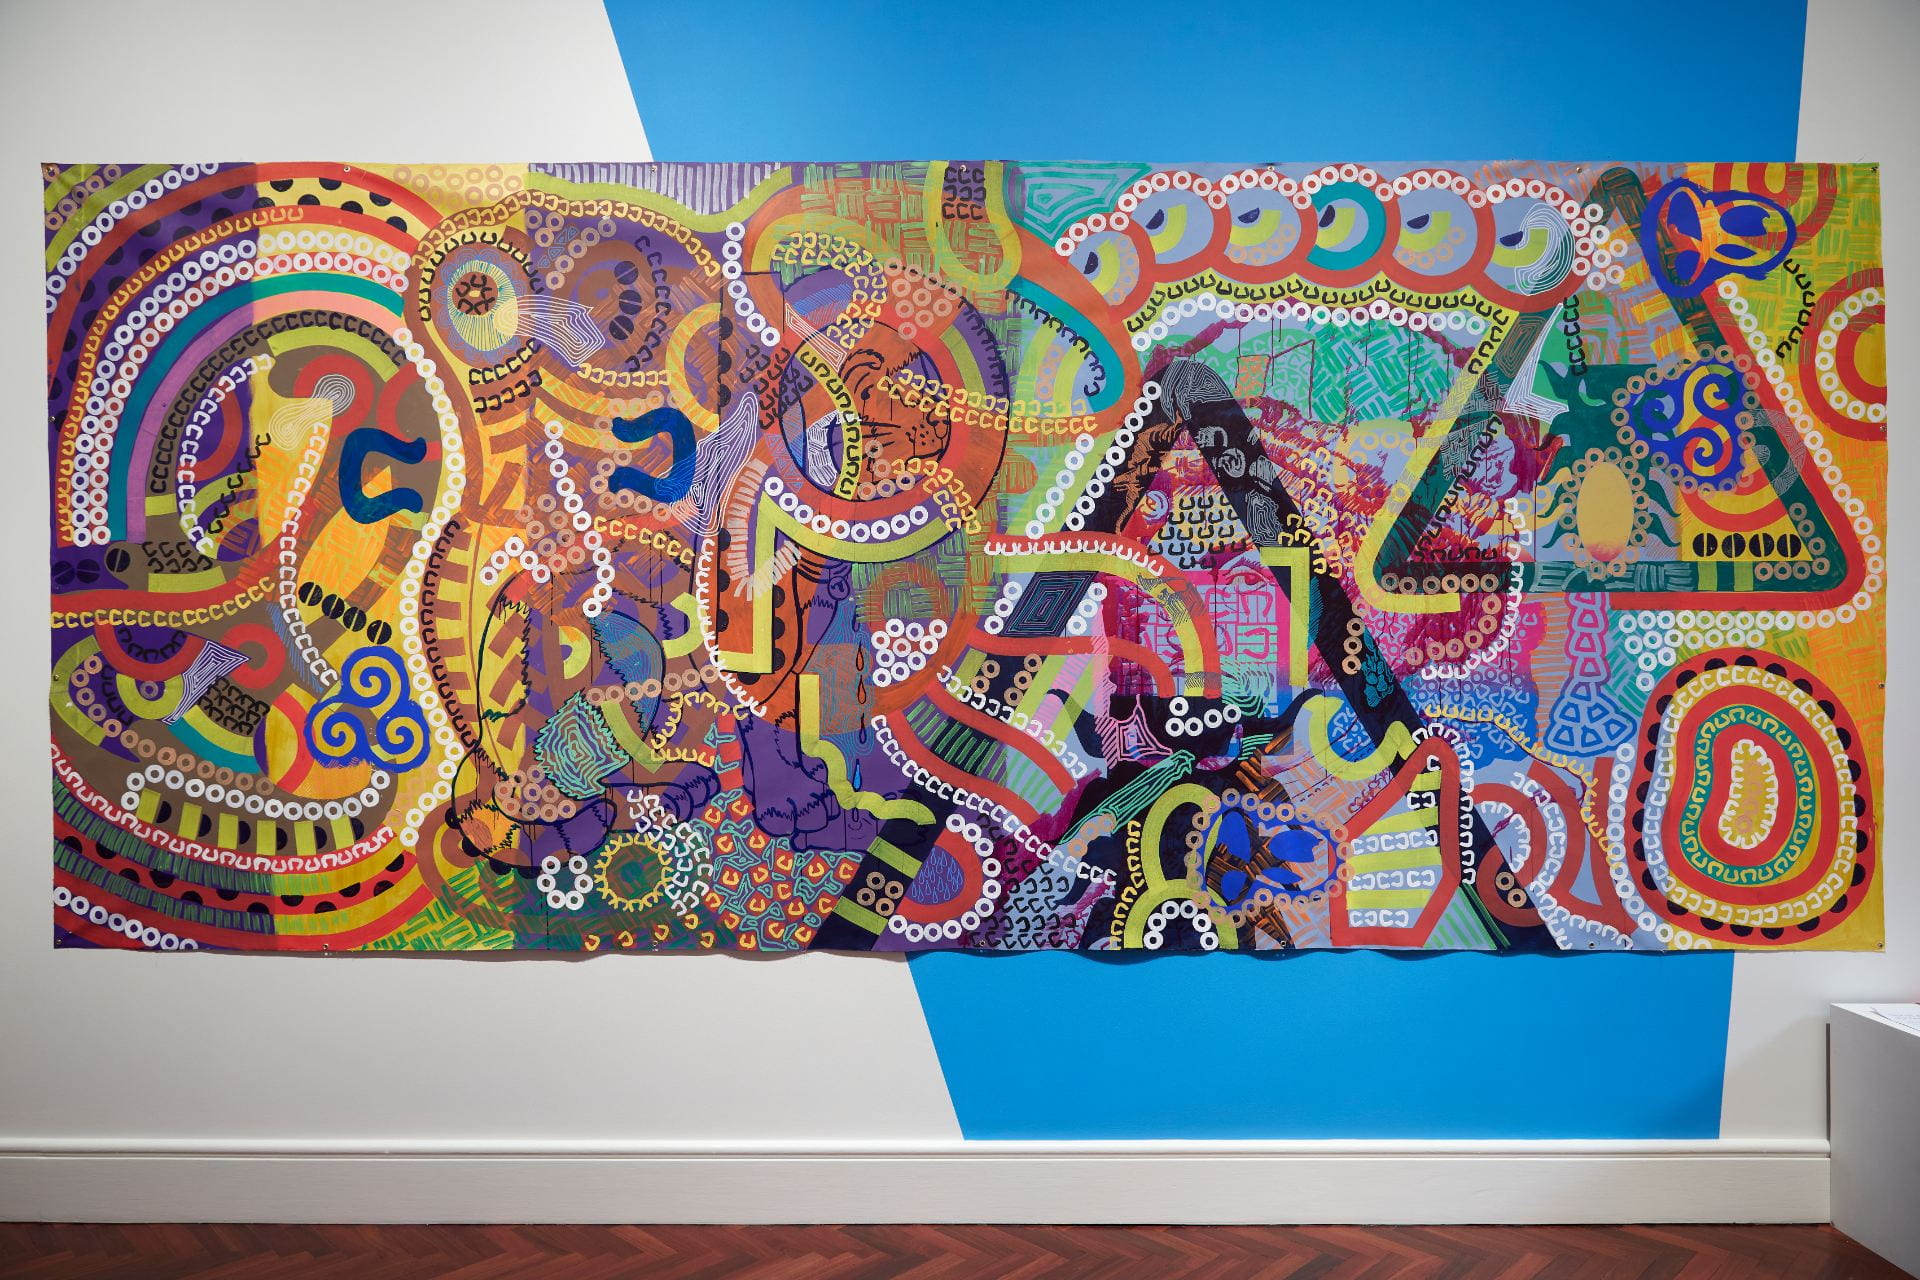 A large rectangular painting hanging on a wall. The painting is filled with curved patterns, shapes and colors.